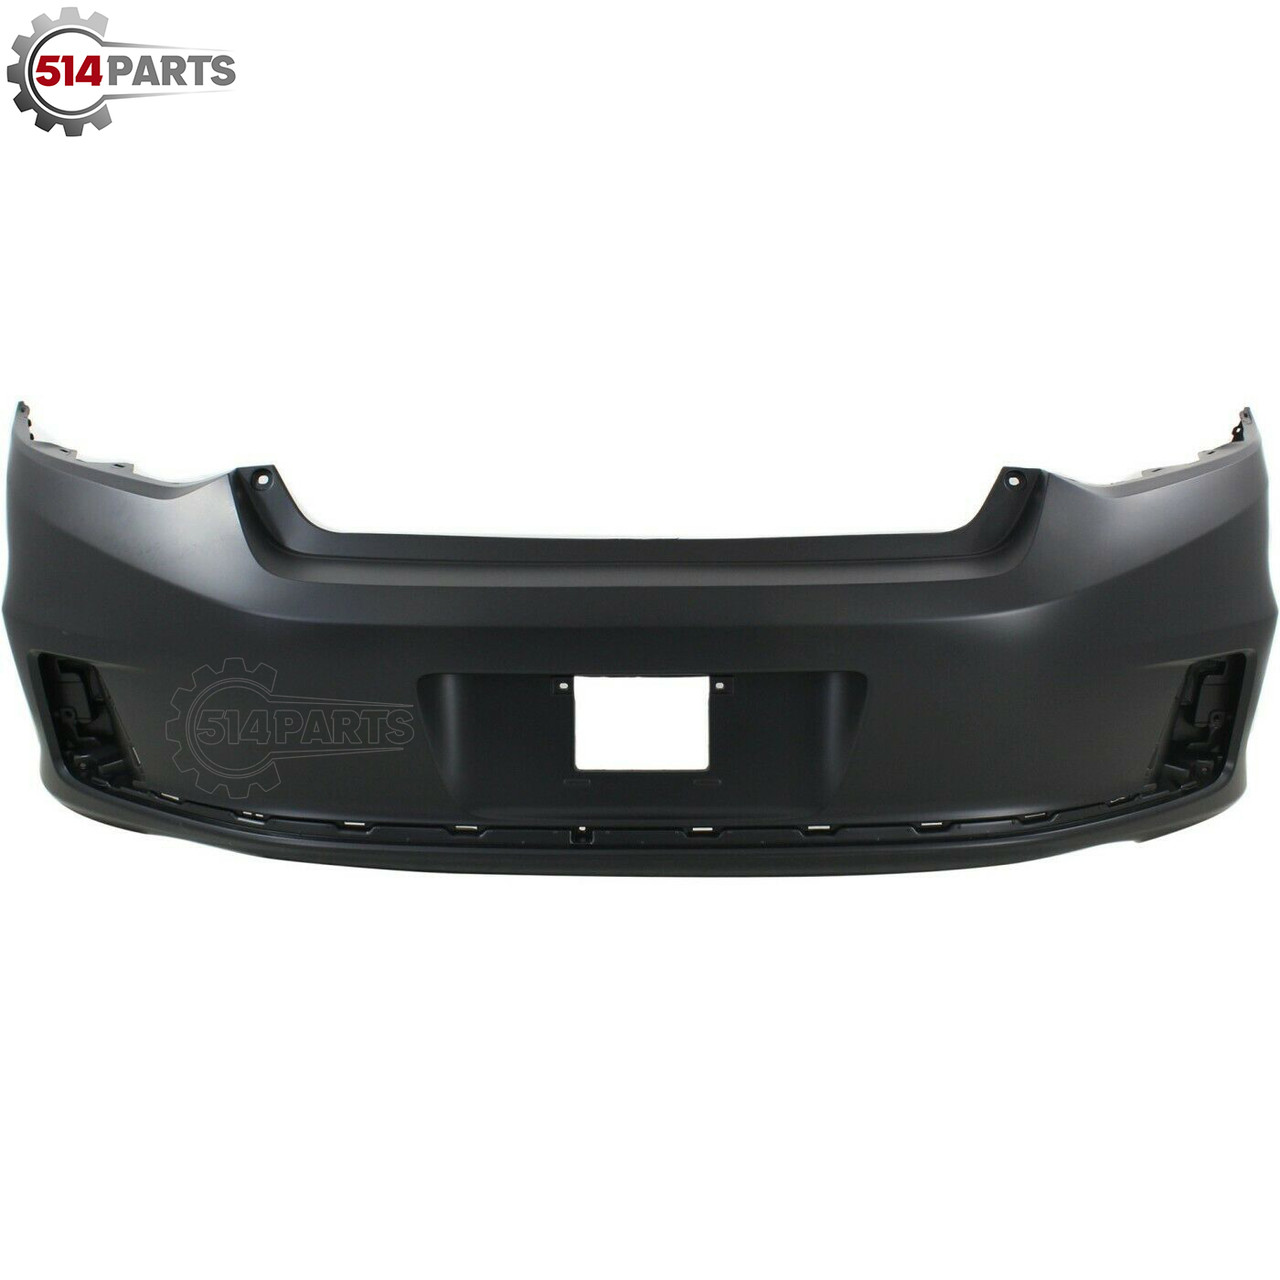 2013 - 2015 HONDA ACCORD COUPE 4CYL/V6 REAR BUMPER COVER - PARE-CHOCS ARRIERE